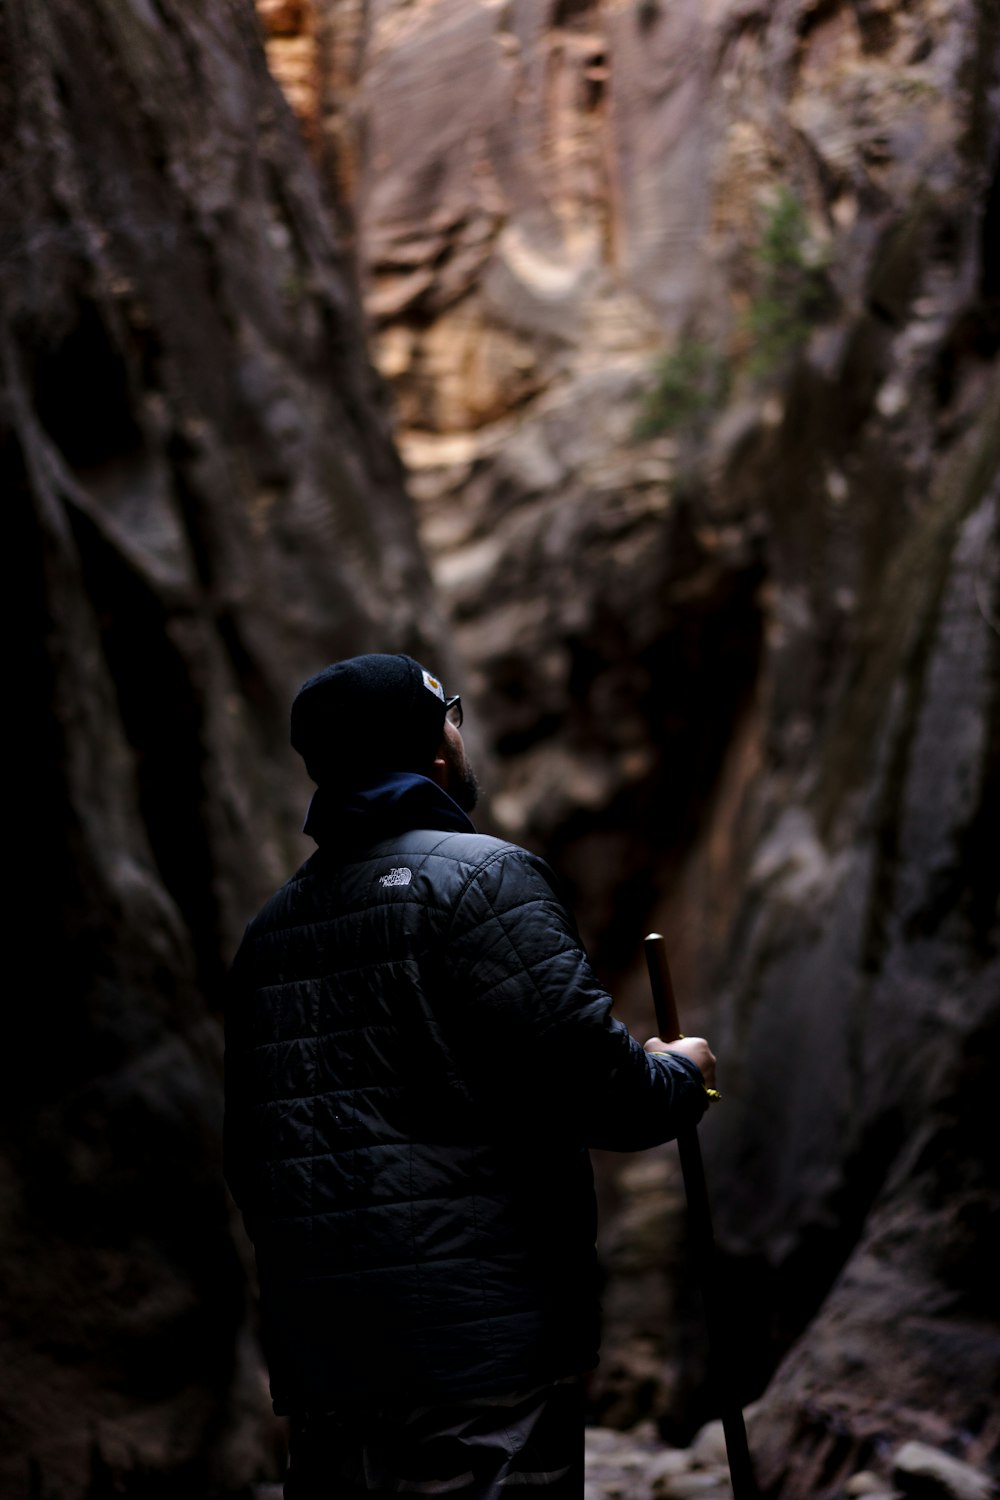 man wearing black jacket holding stick while standing near cave during daytime